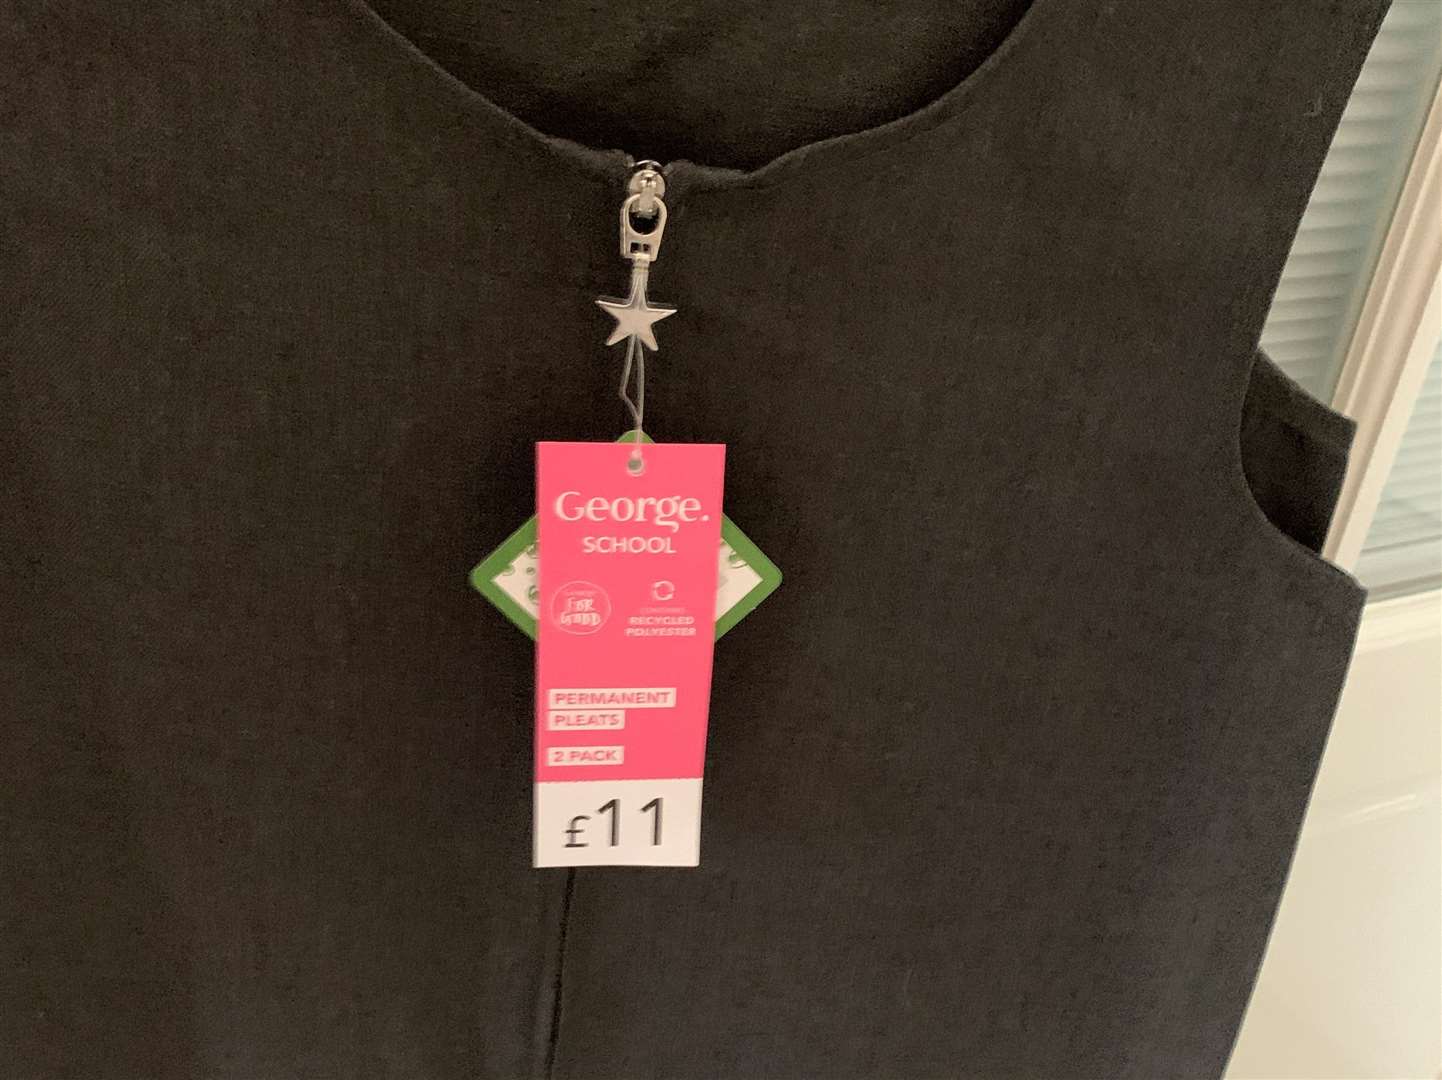 Two school dresses from Asda - for £11